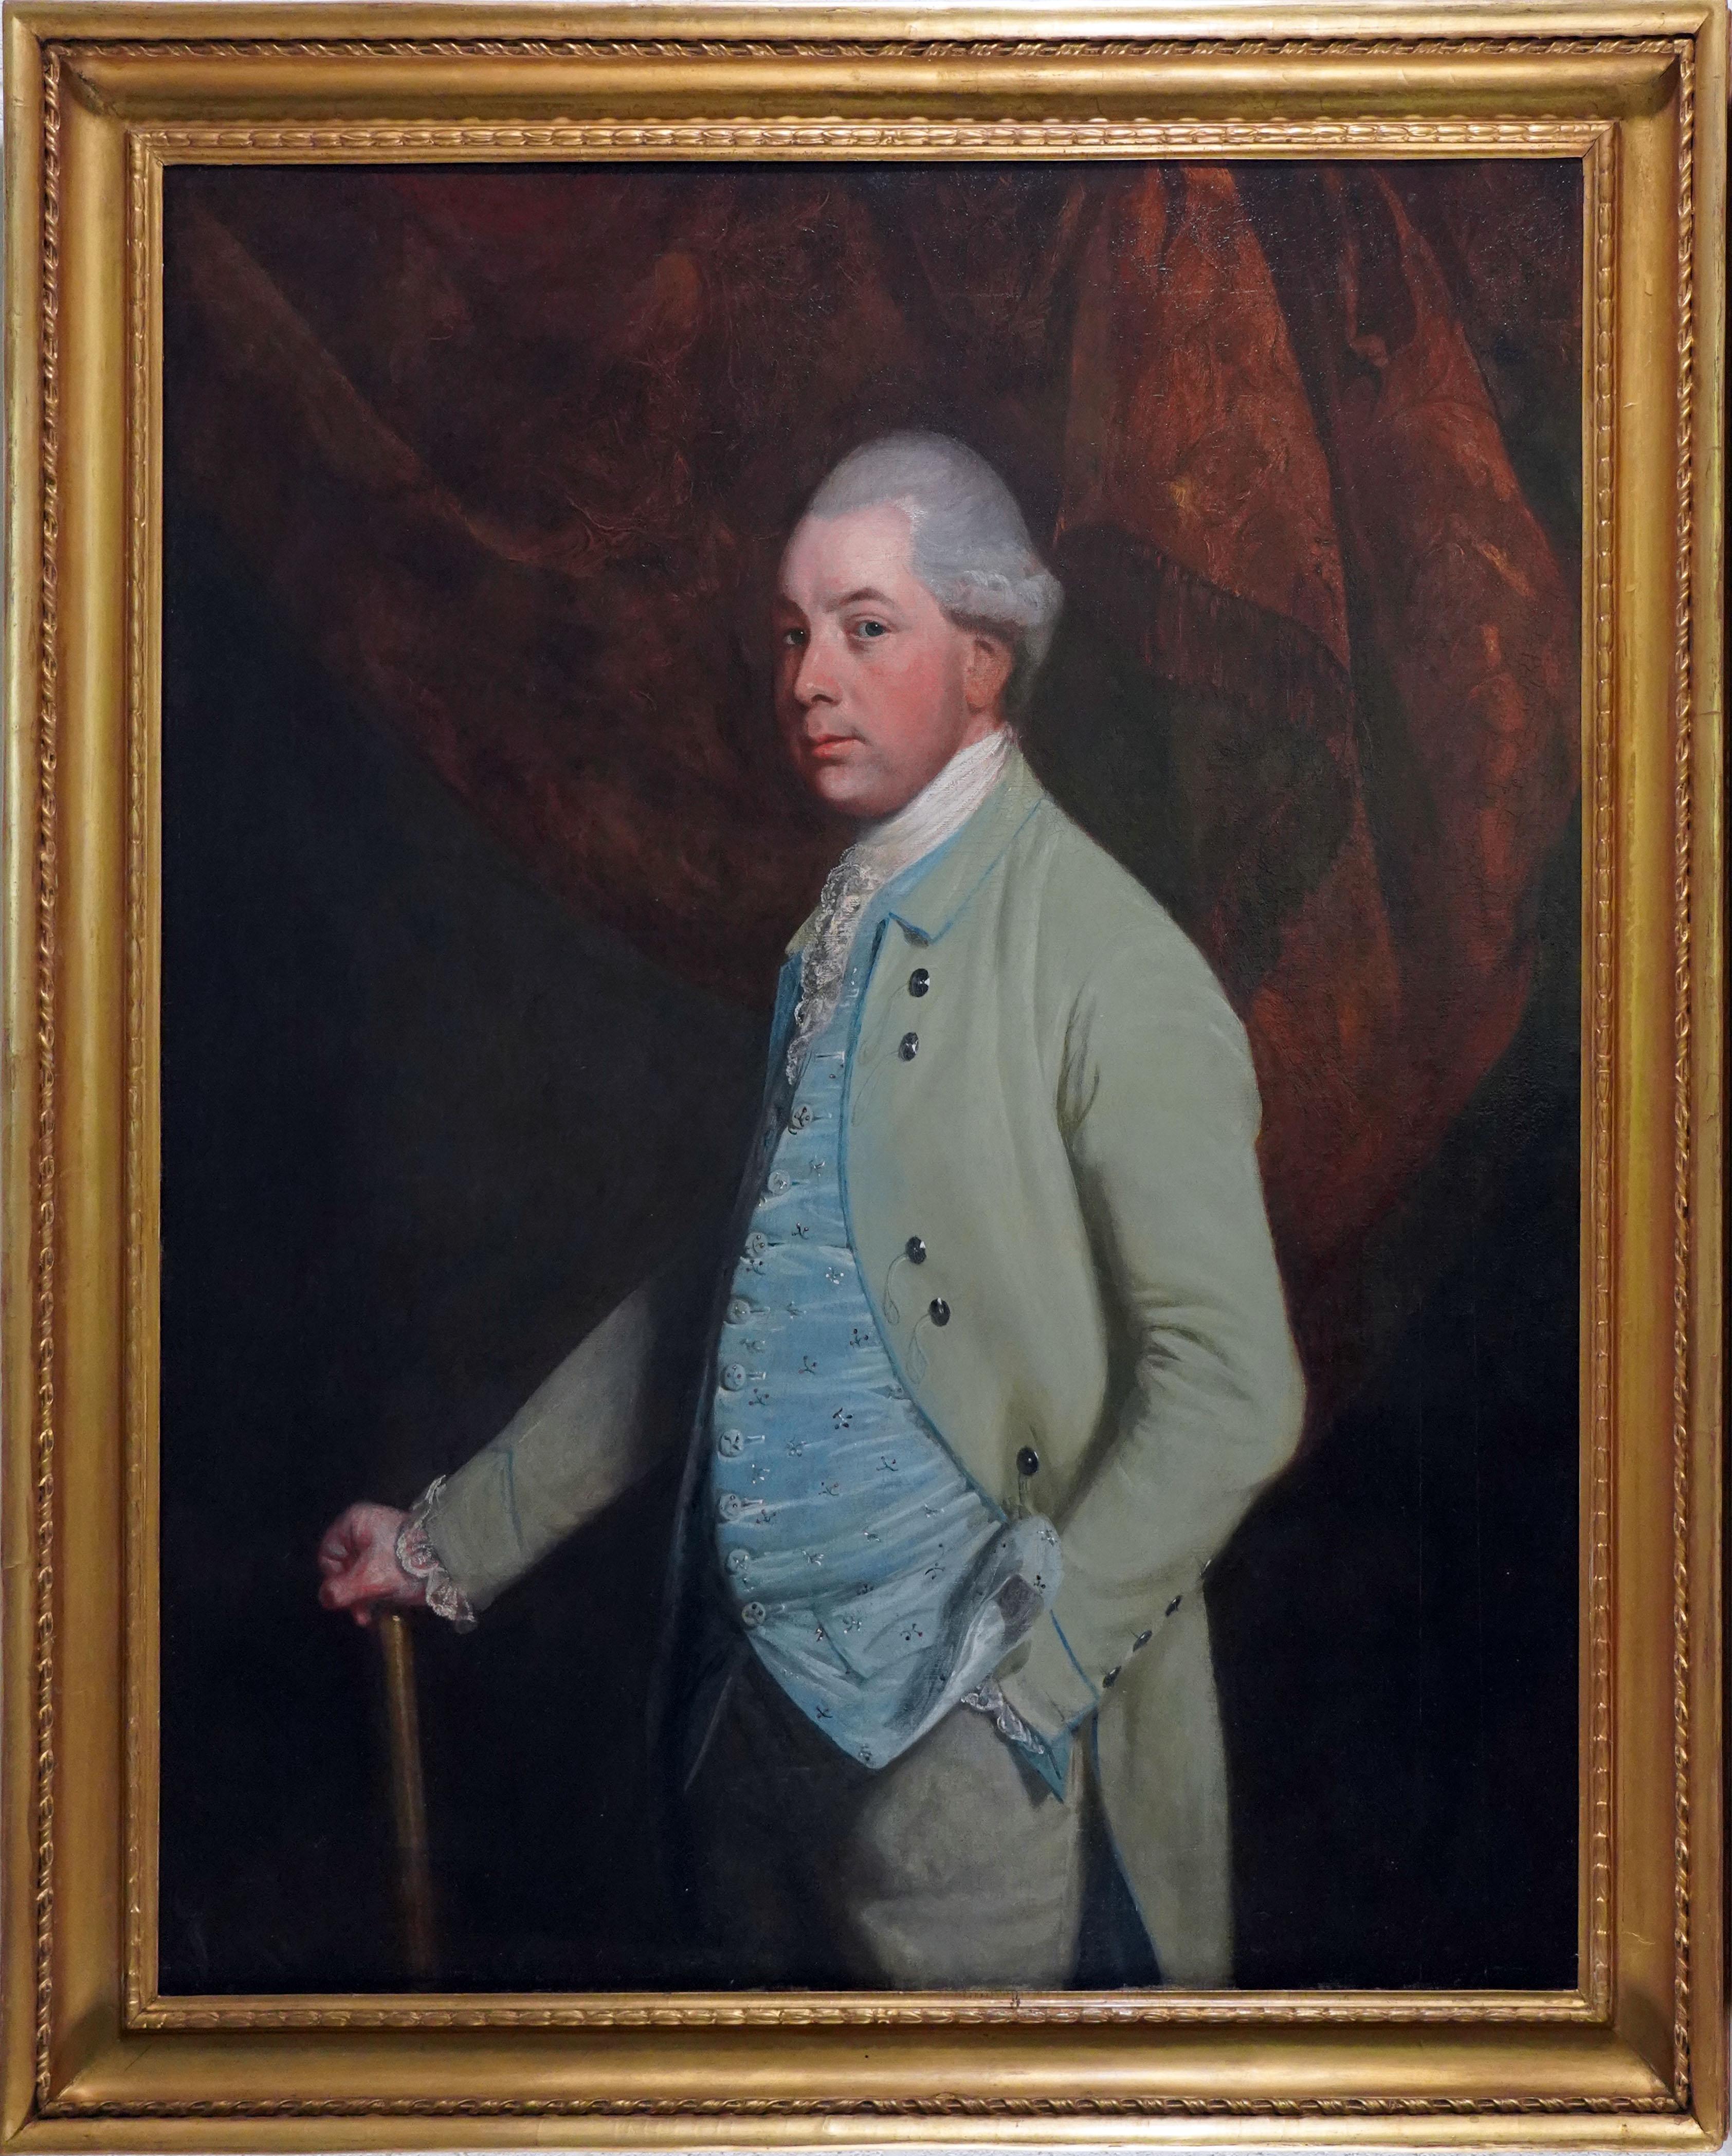 Thomas Beach Portrait Painting - Portrait of William, Baron Craven wearing a green jacket in an interior